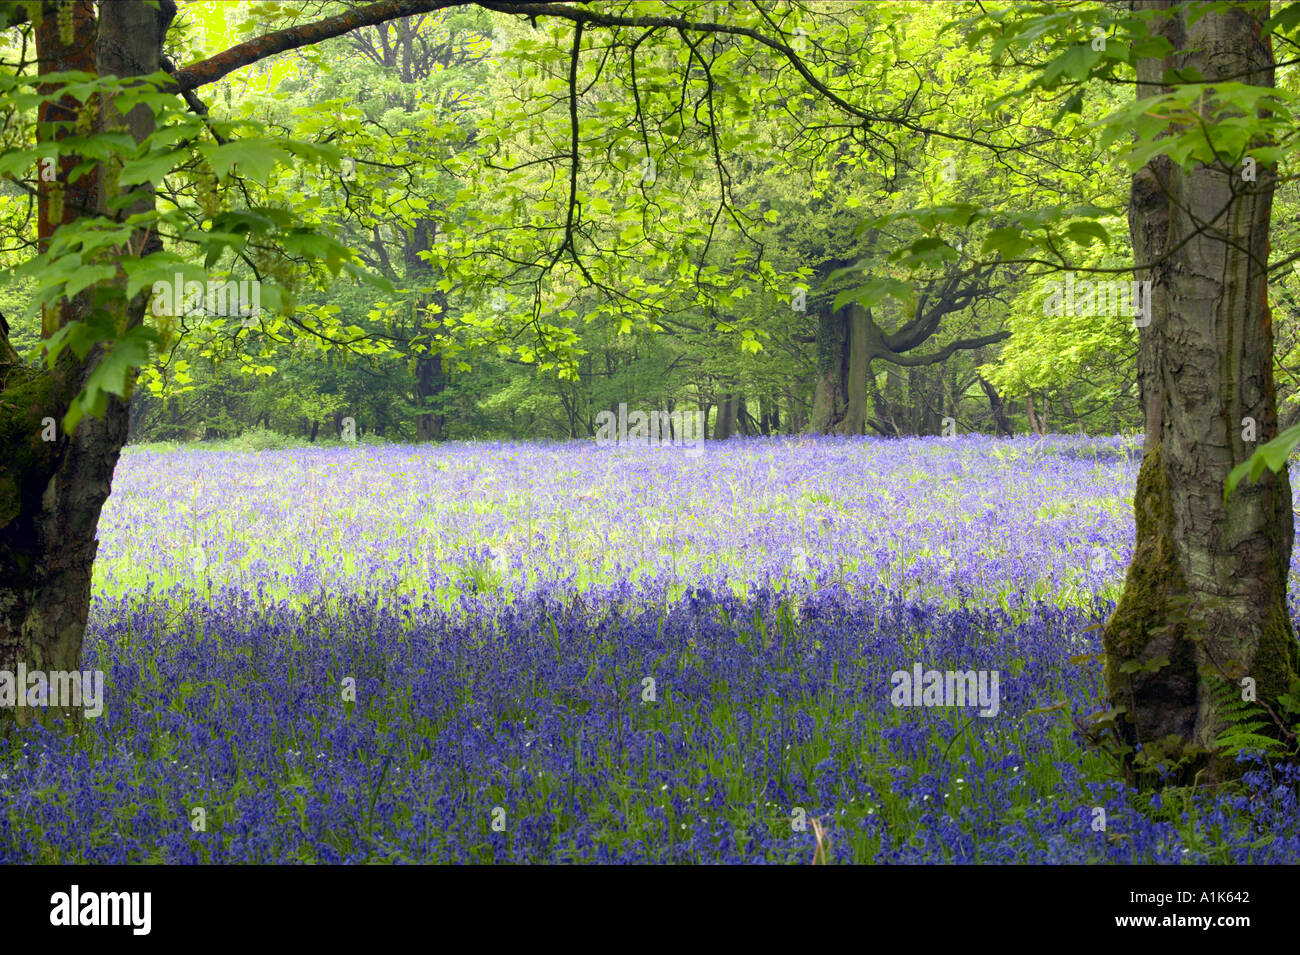 Bluebells Hyacinthoides non scripta growing with Greater Stitchwort in ancient coppiced woodland Stock Photo